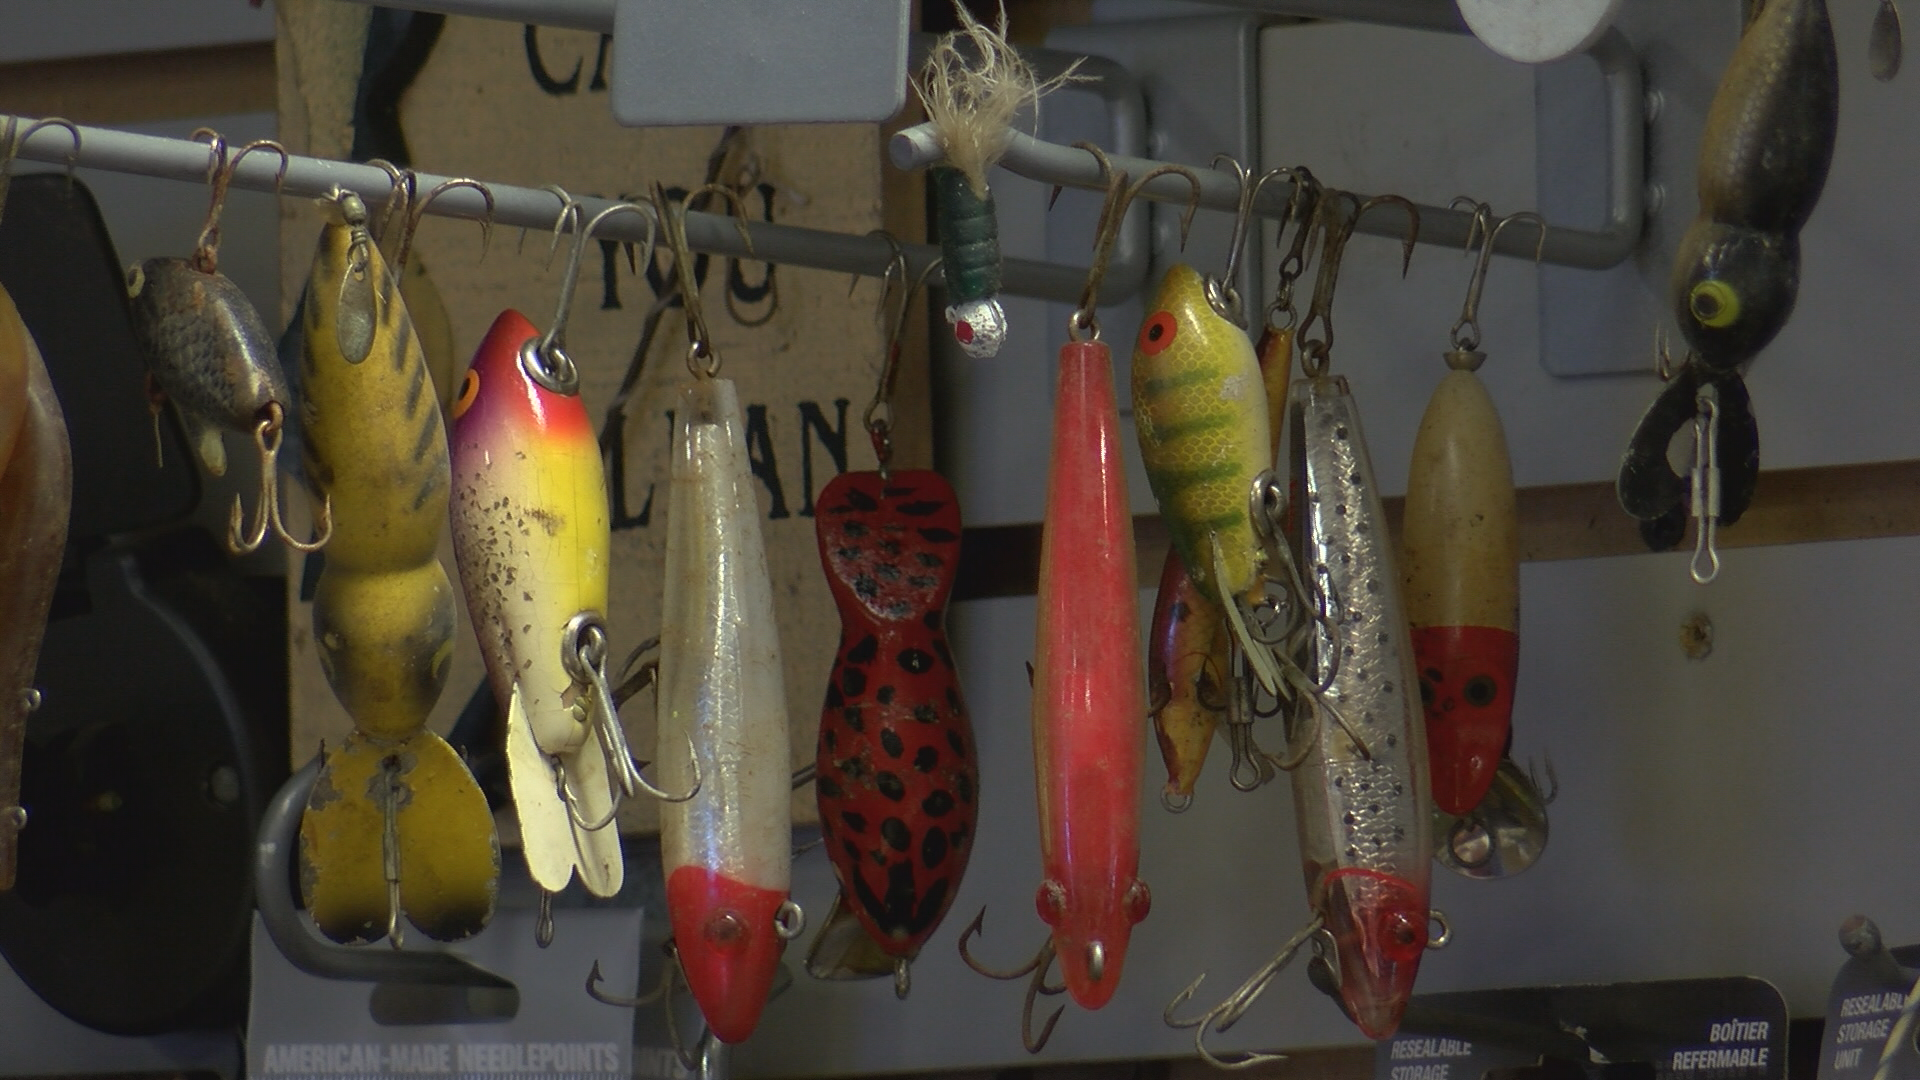 How to Make a Fishing Tackle Wall for Storing Baits 